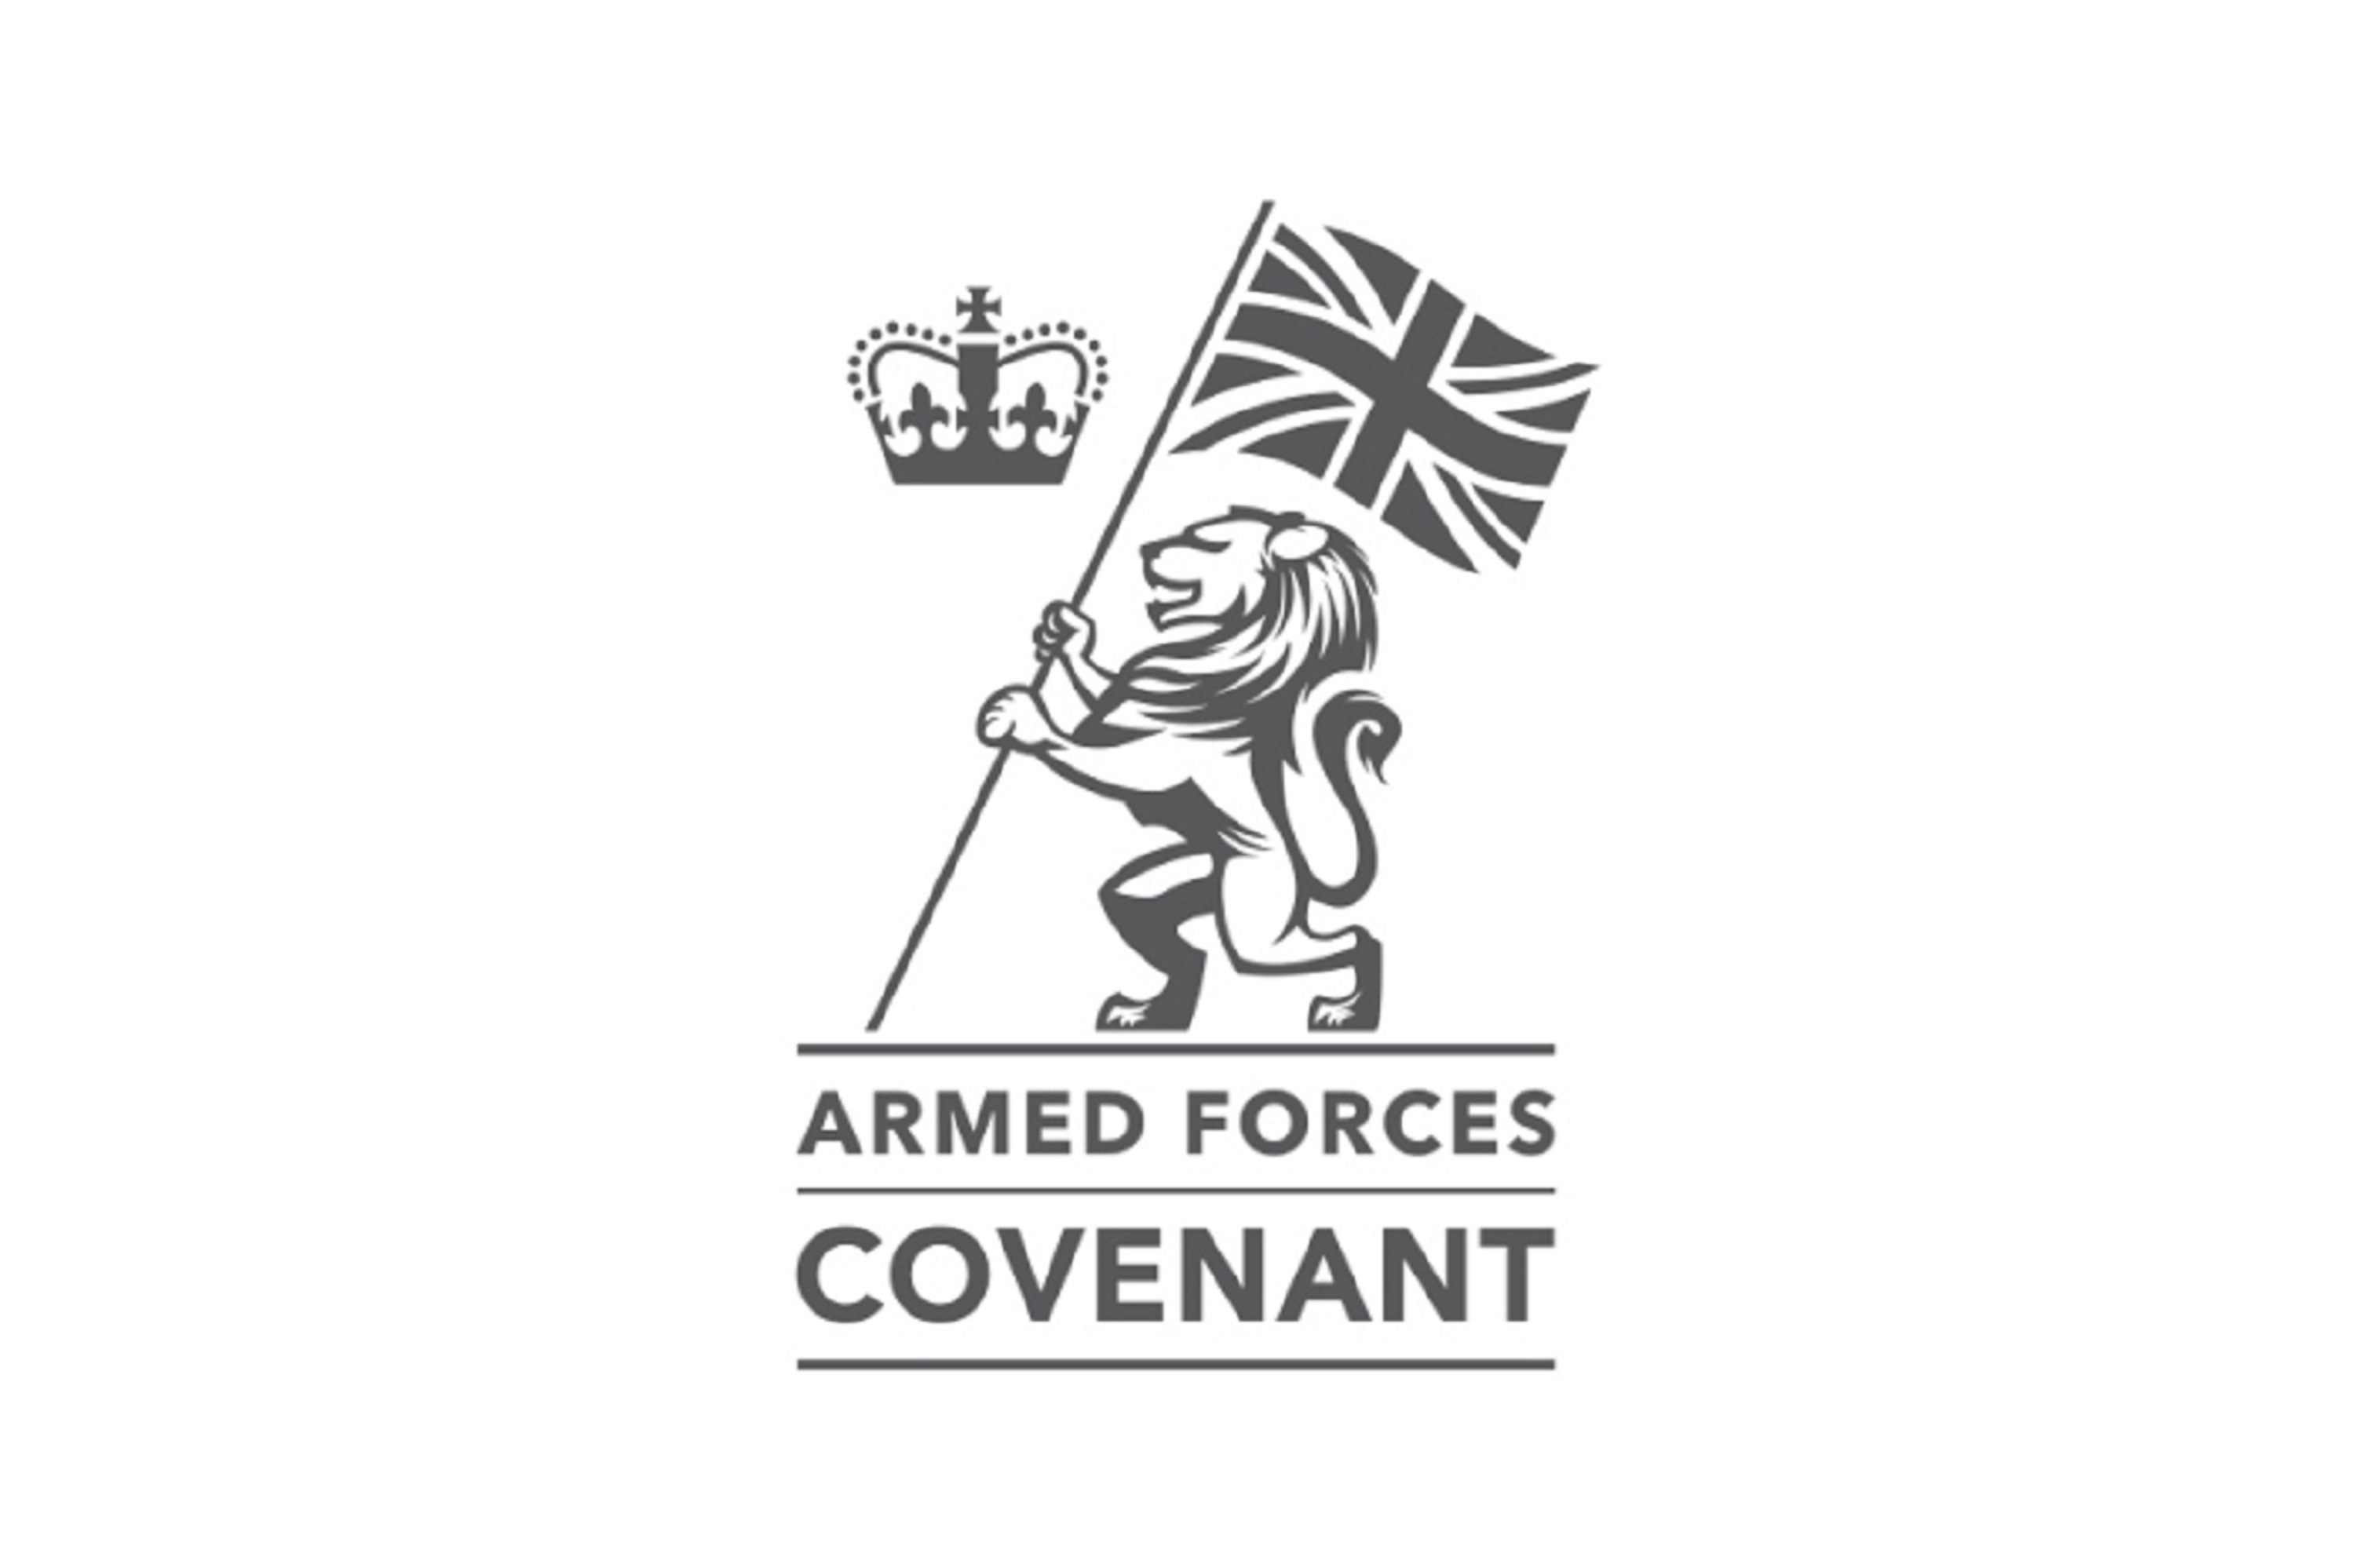 Riverside signs up to support the Armed Forces